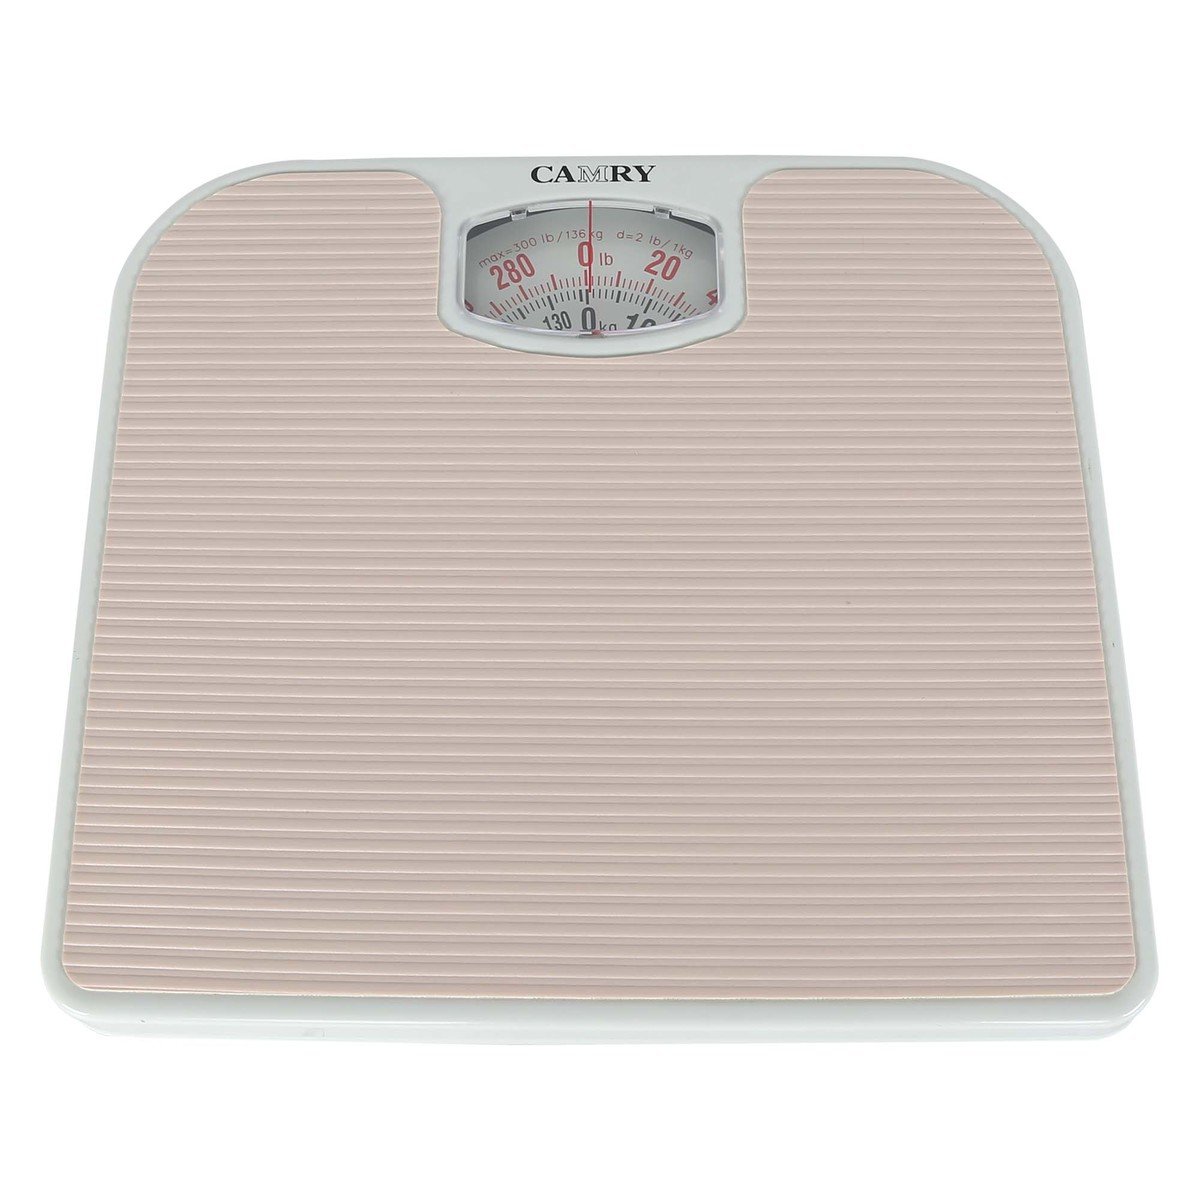 Camry Bathroom Scale BR-2016 Assorted